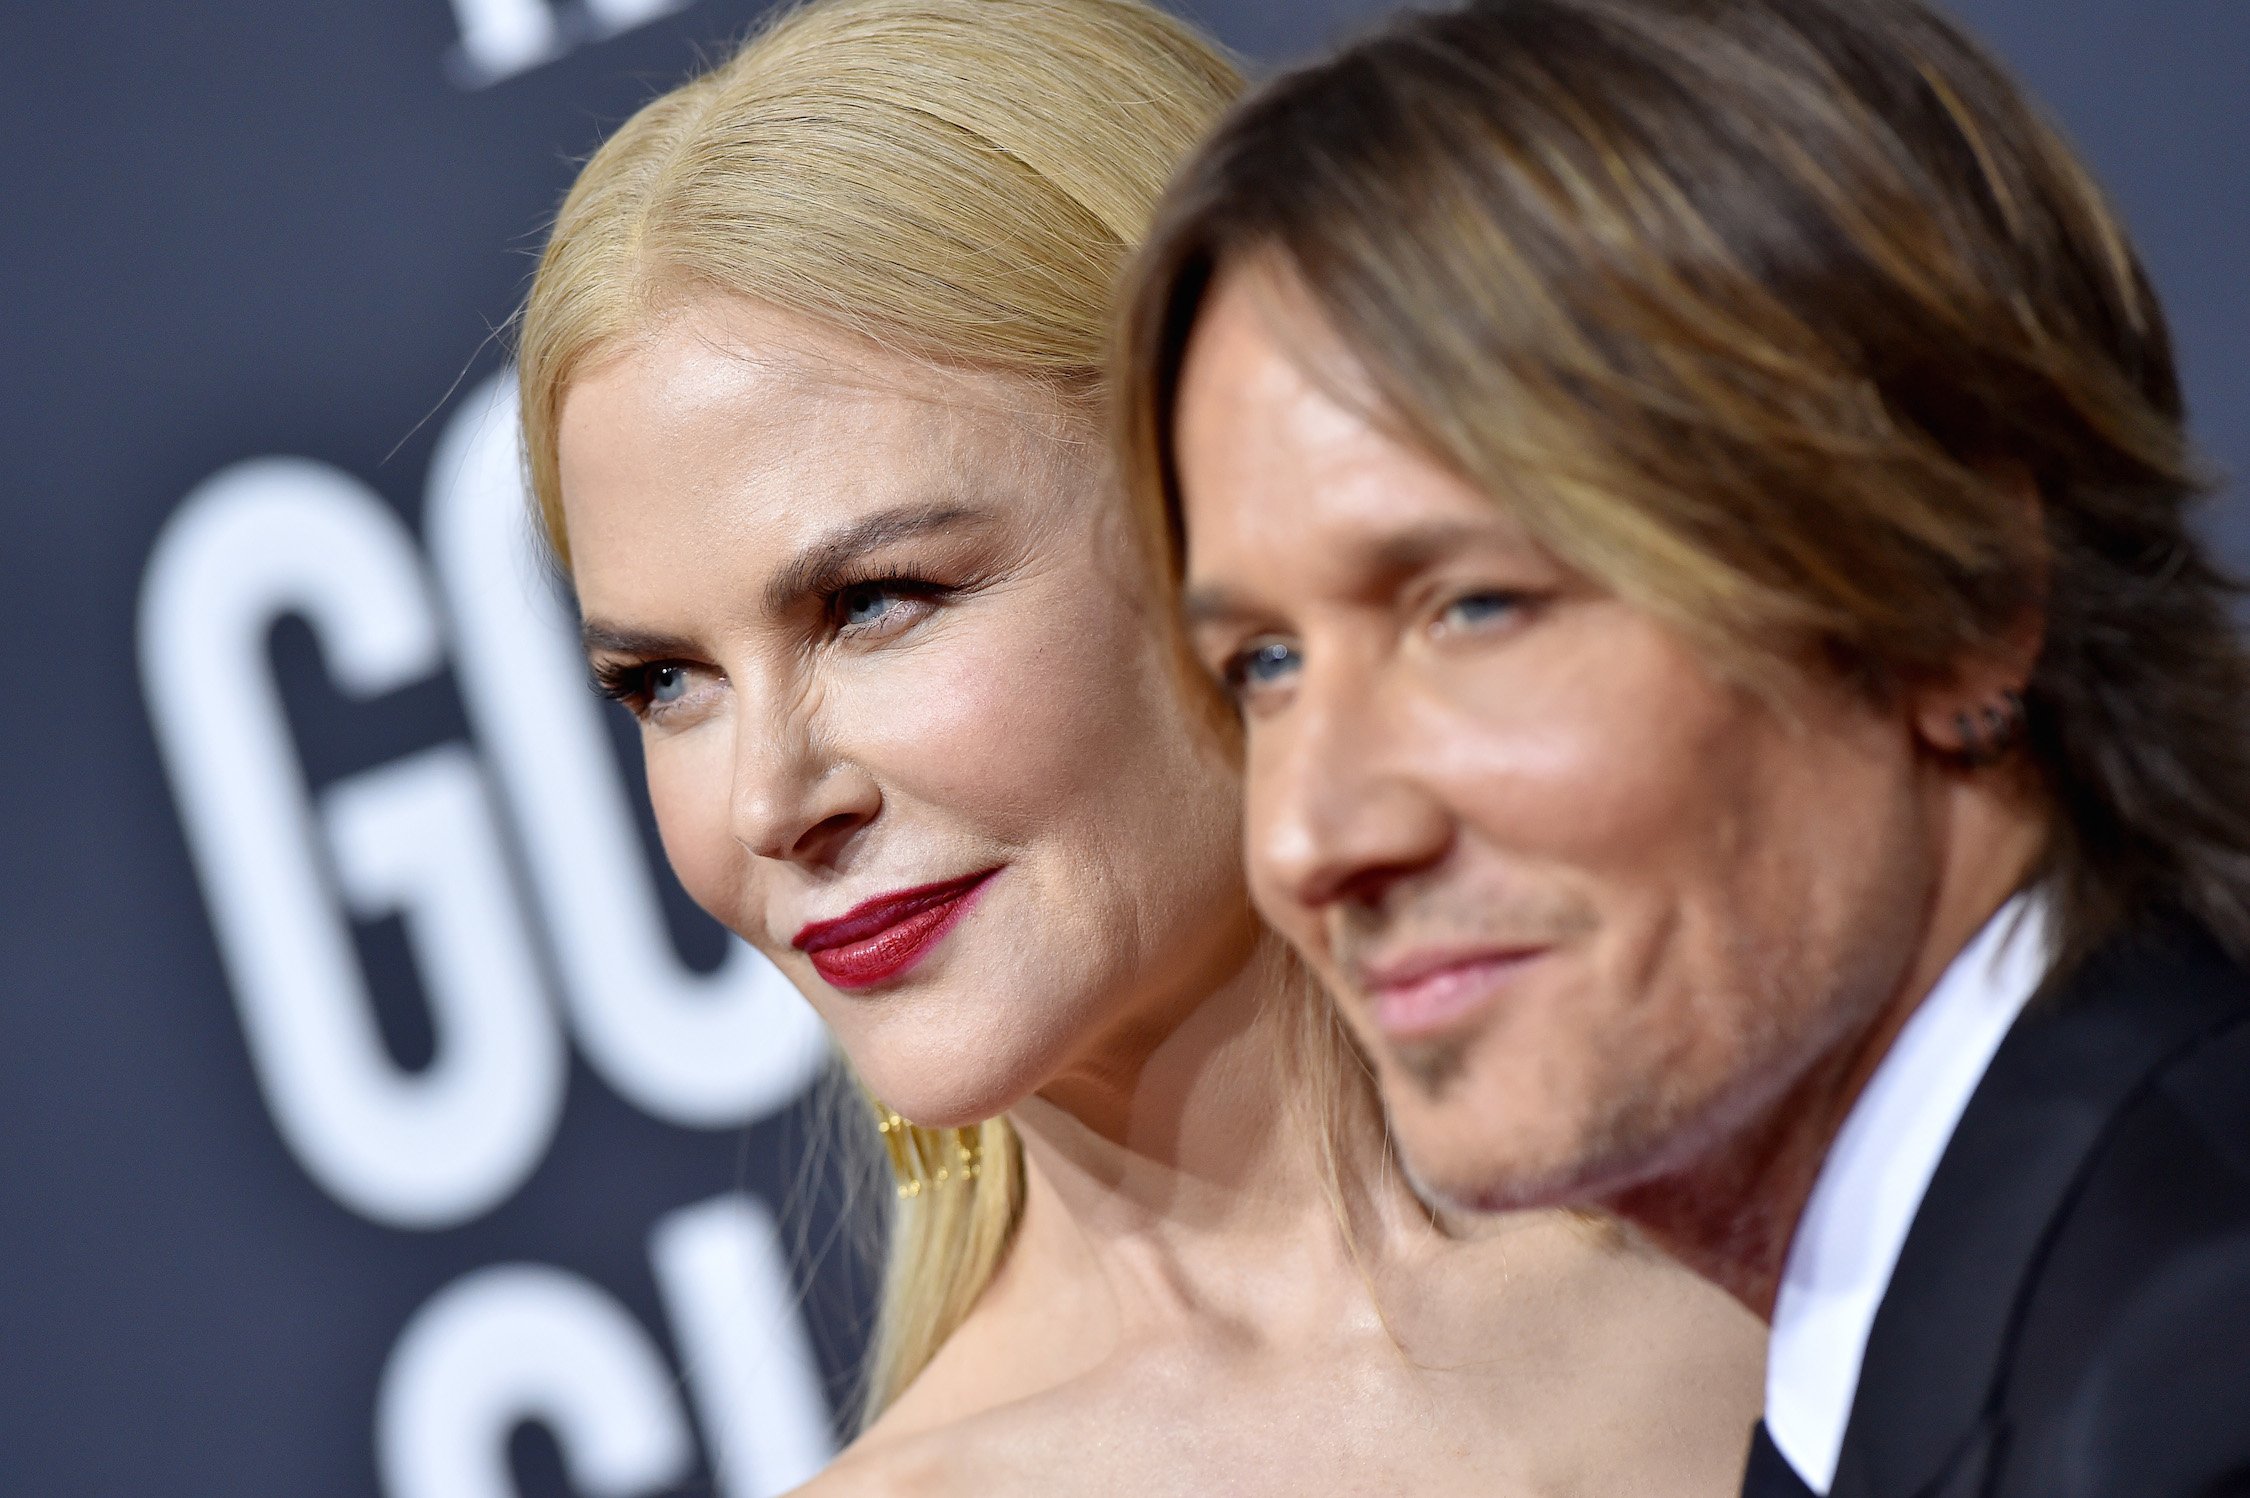 Nicole Kidman and Keith Urban attend the 77th Annual Golden Globe Awards